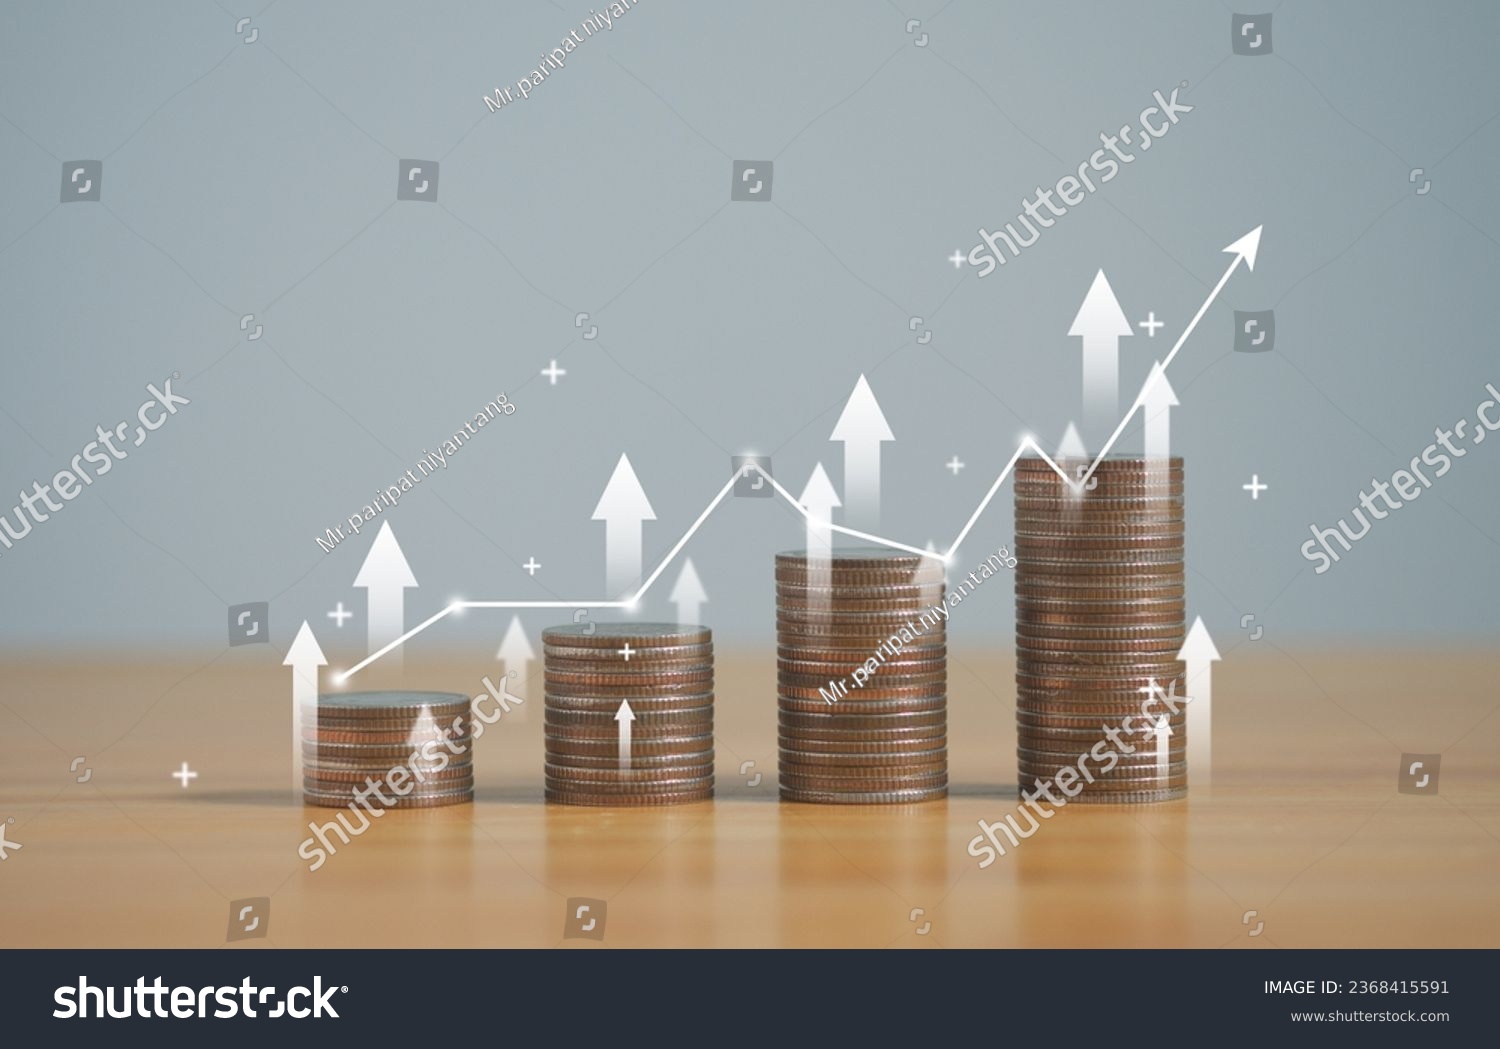 stack of silver coins with trading chart in financial concepts and financial investment business stock growth, for financial banking increase interest rate. #2368415591